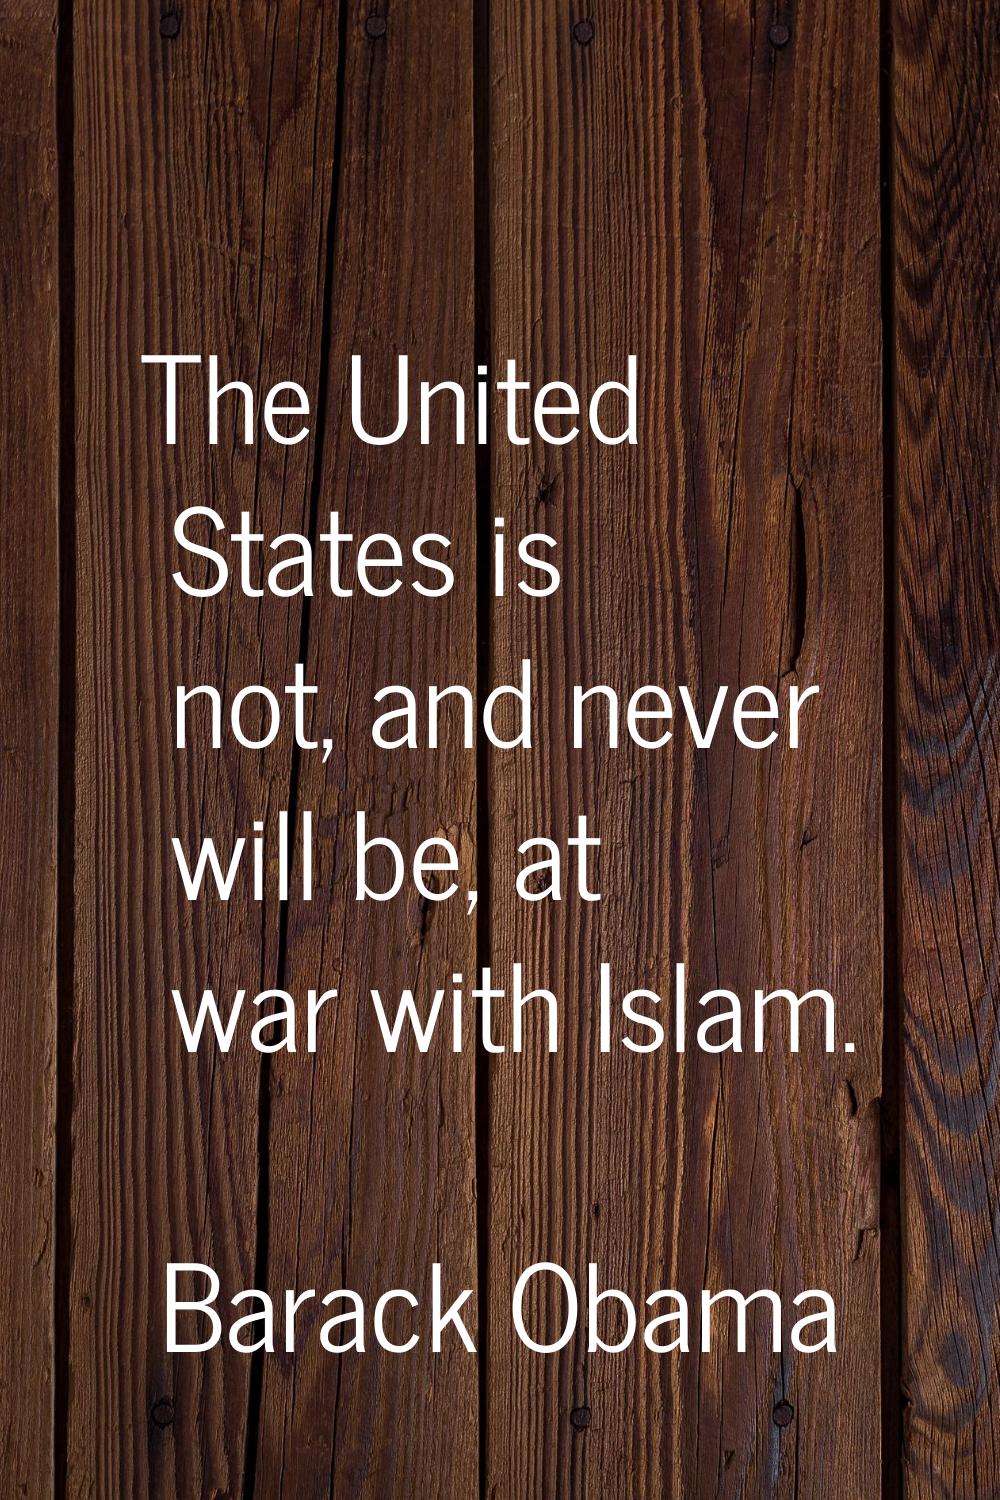 The United States is not, and never will be, at war with Islam.